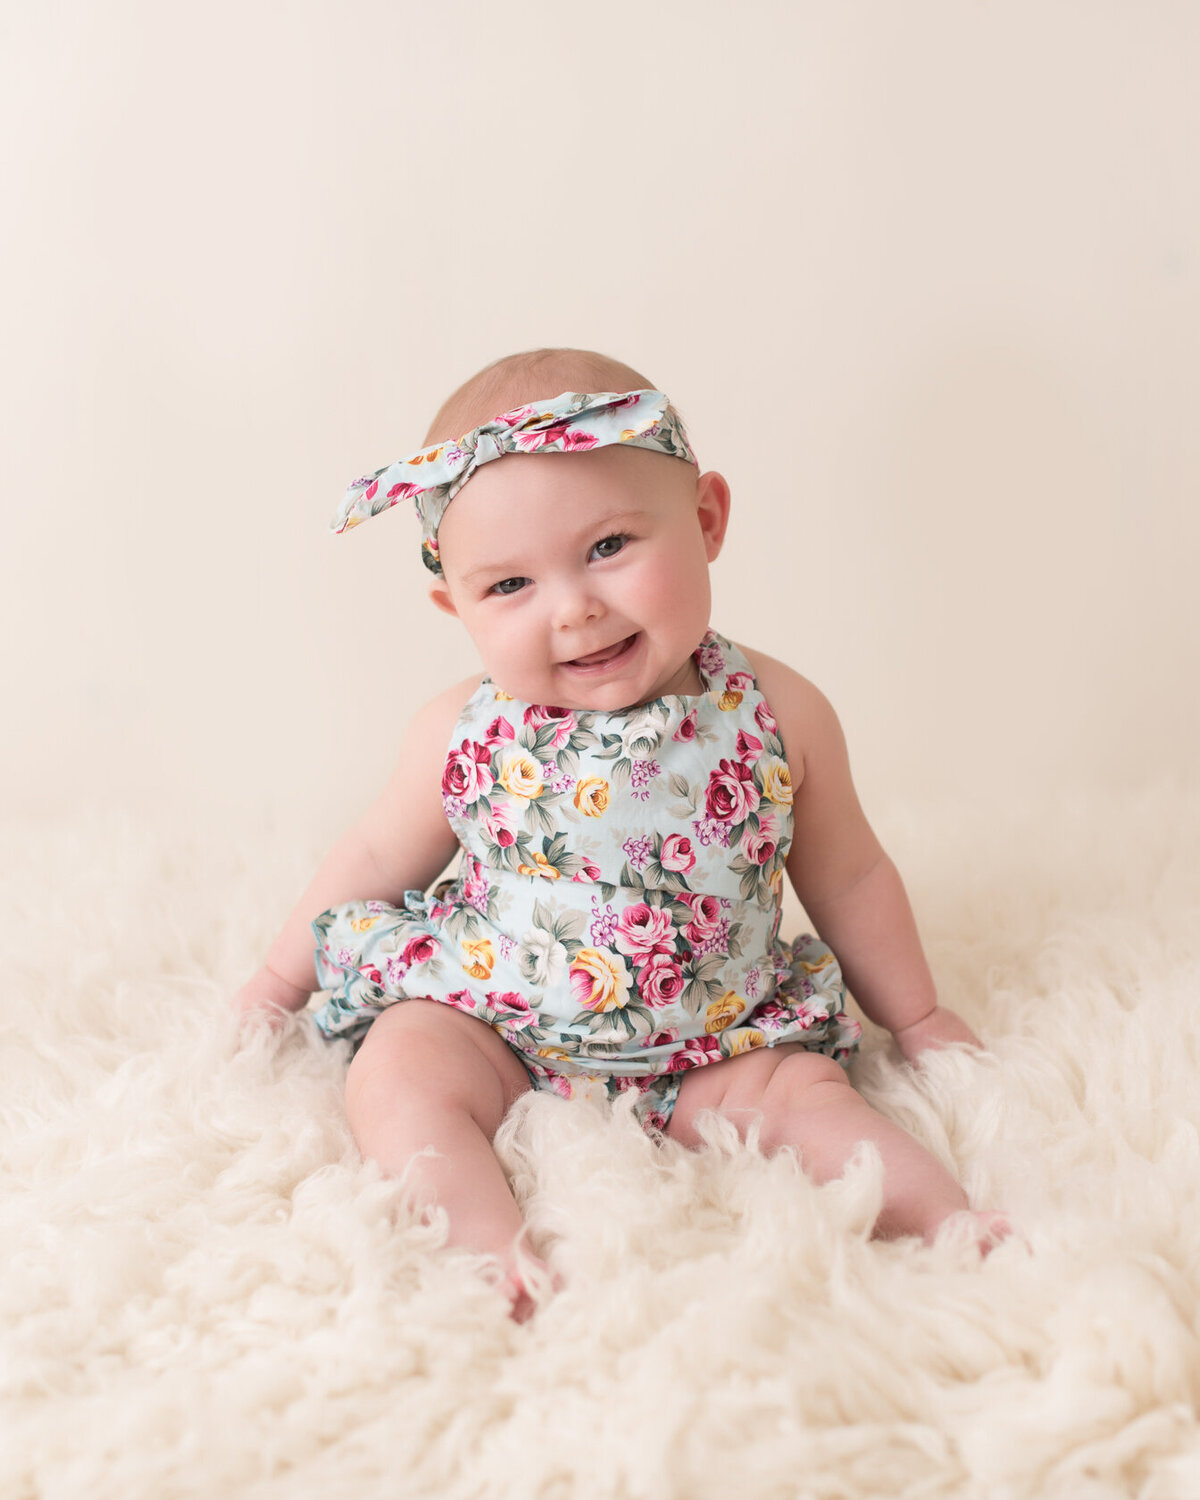 Adorable baby in cream furry background portrait